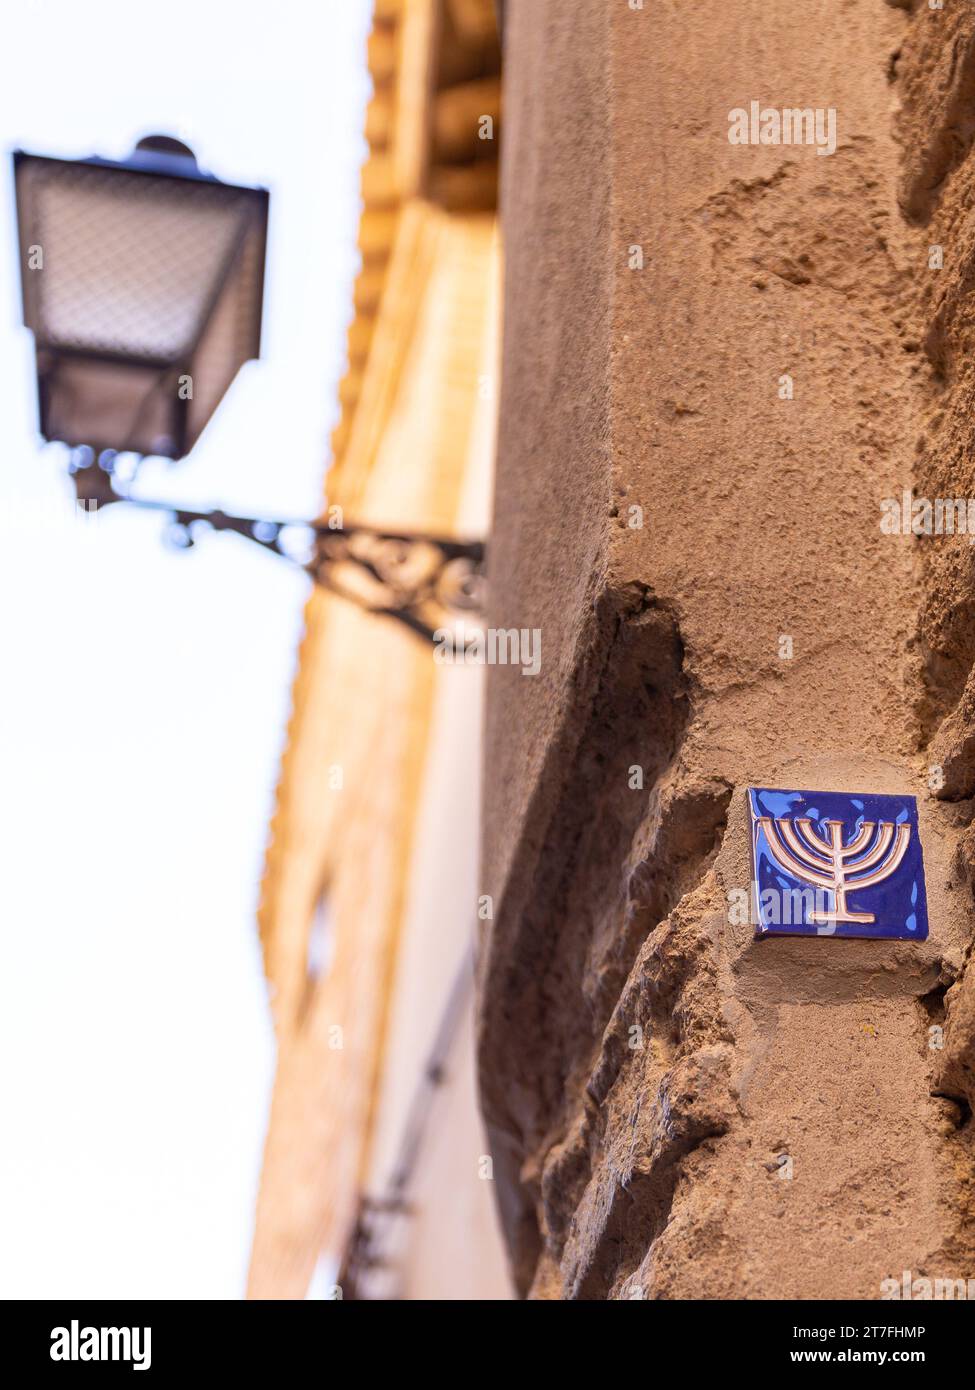 Small blue tile with menorah symbol embedded in the stone facade in the former Jewish quarter in Toledo, Spain, old-style street lamp. Stock Photo